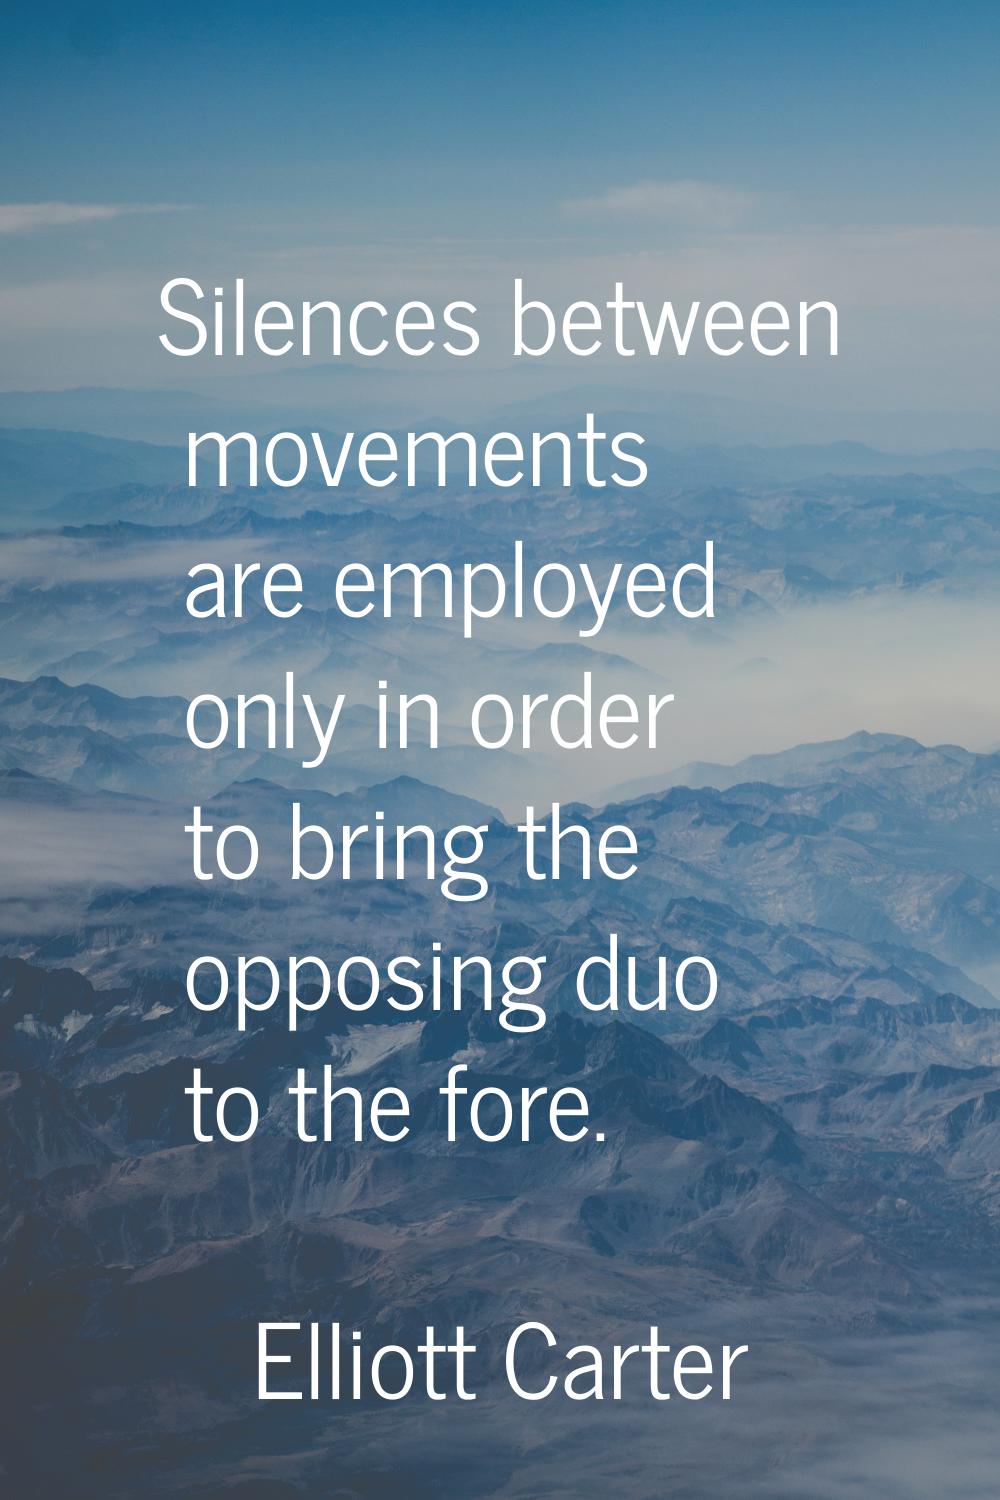 Silences between movements are employed only in order to bring the opposing duo to the fore.